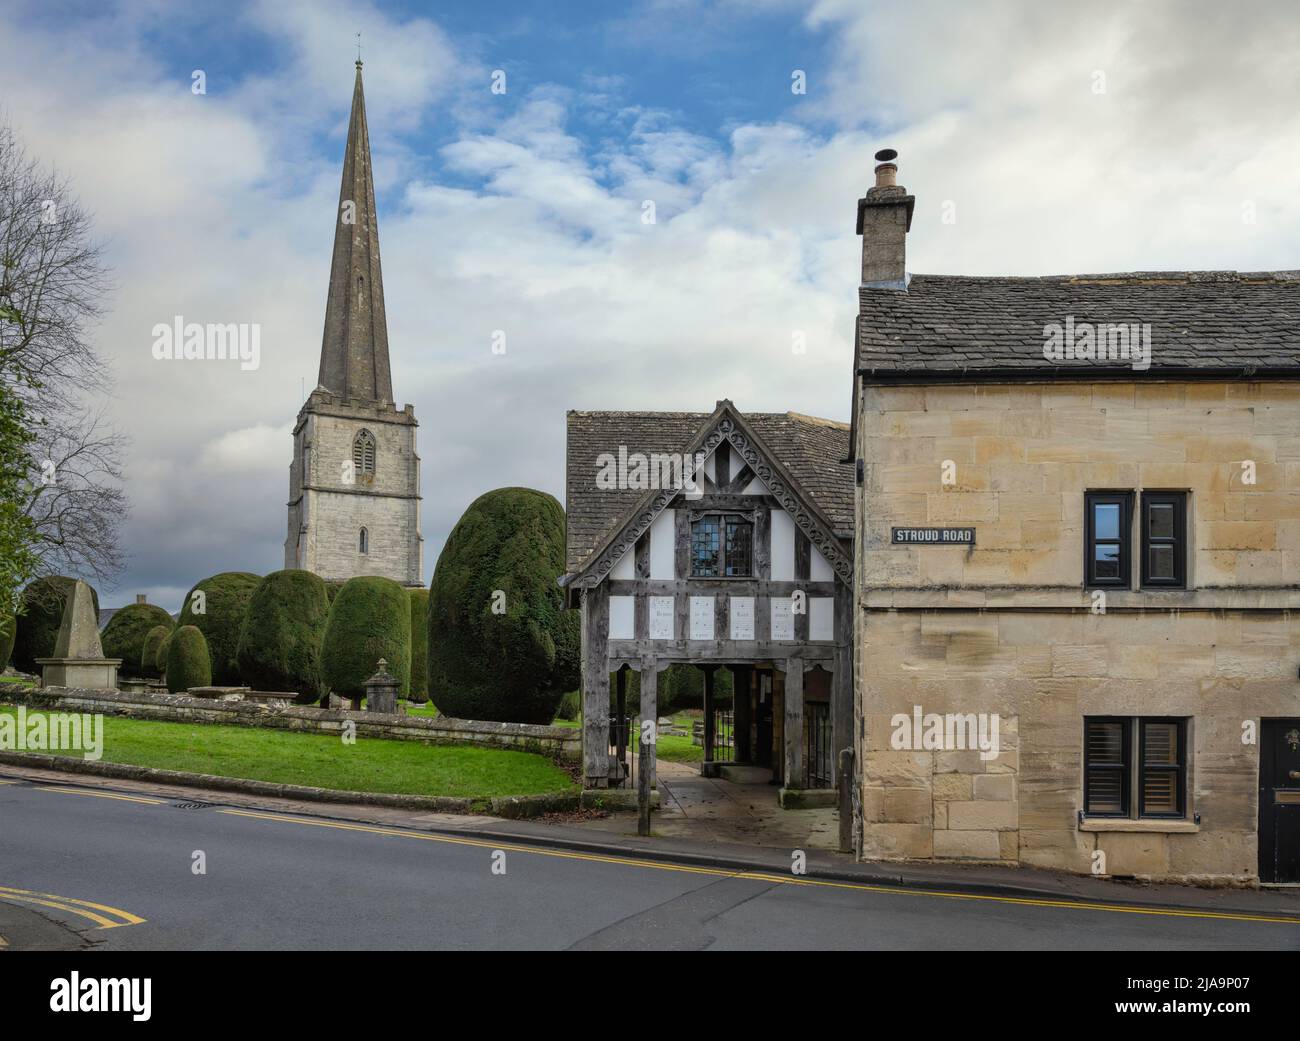 Cotswold town of Painswick, Gloucestershire, England. Stock Photo